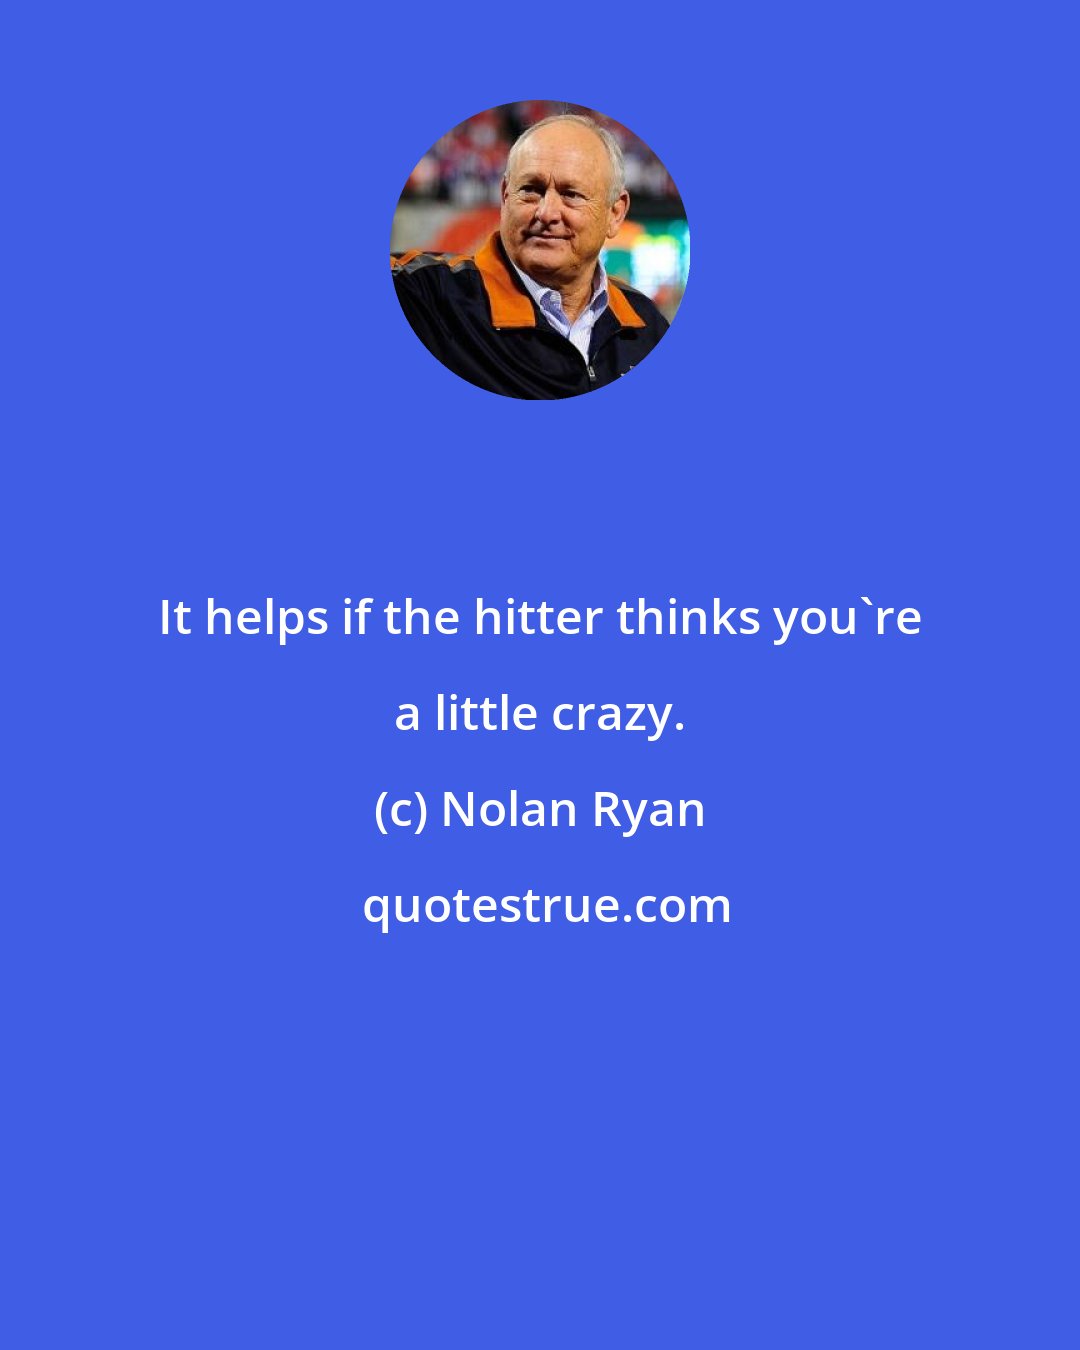 Nolan Ryan: It helps if the hitter thinks you're a little crazy.